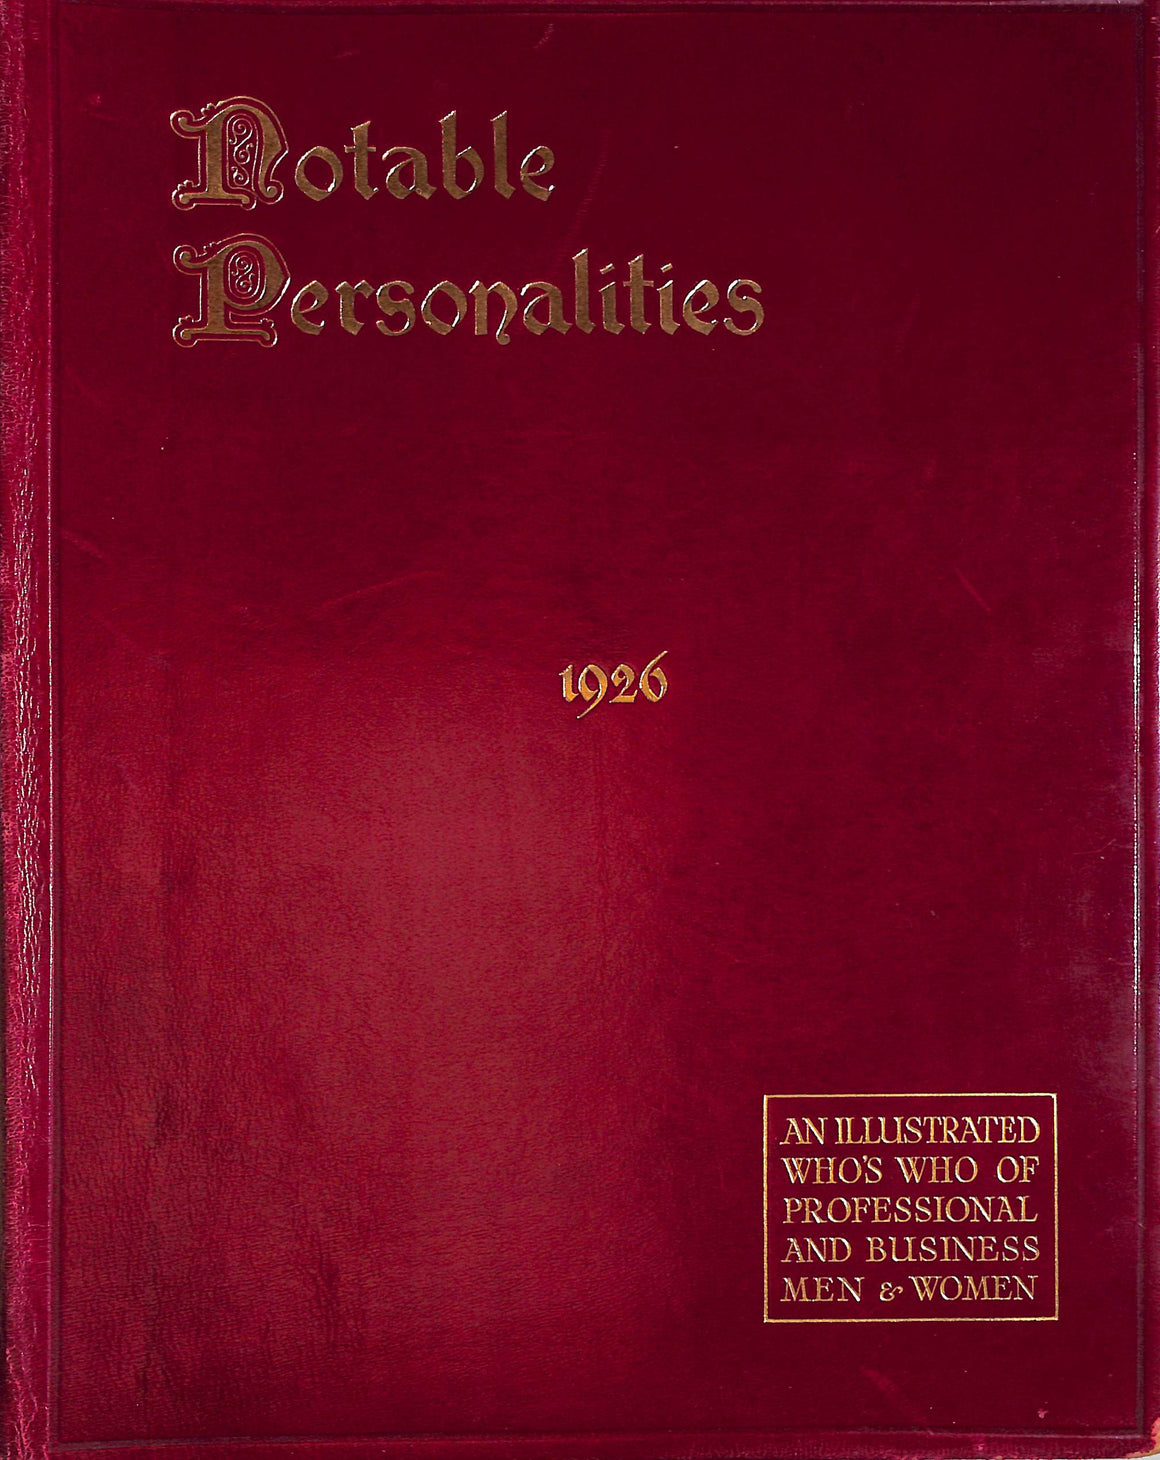 "Notable Personalities: An Illustrated Who's Who Of Professional And Business Men & Women" 1926